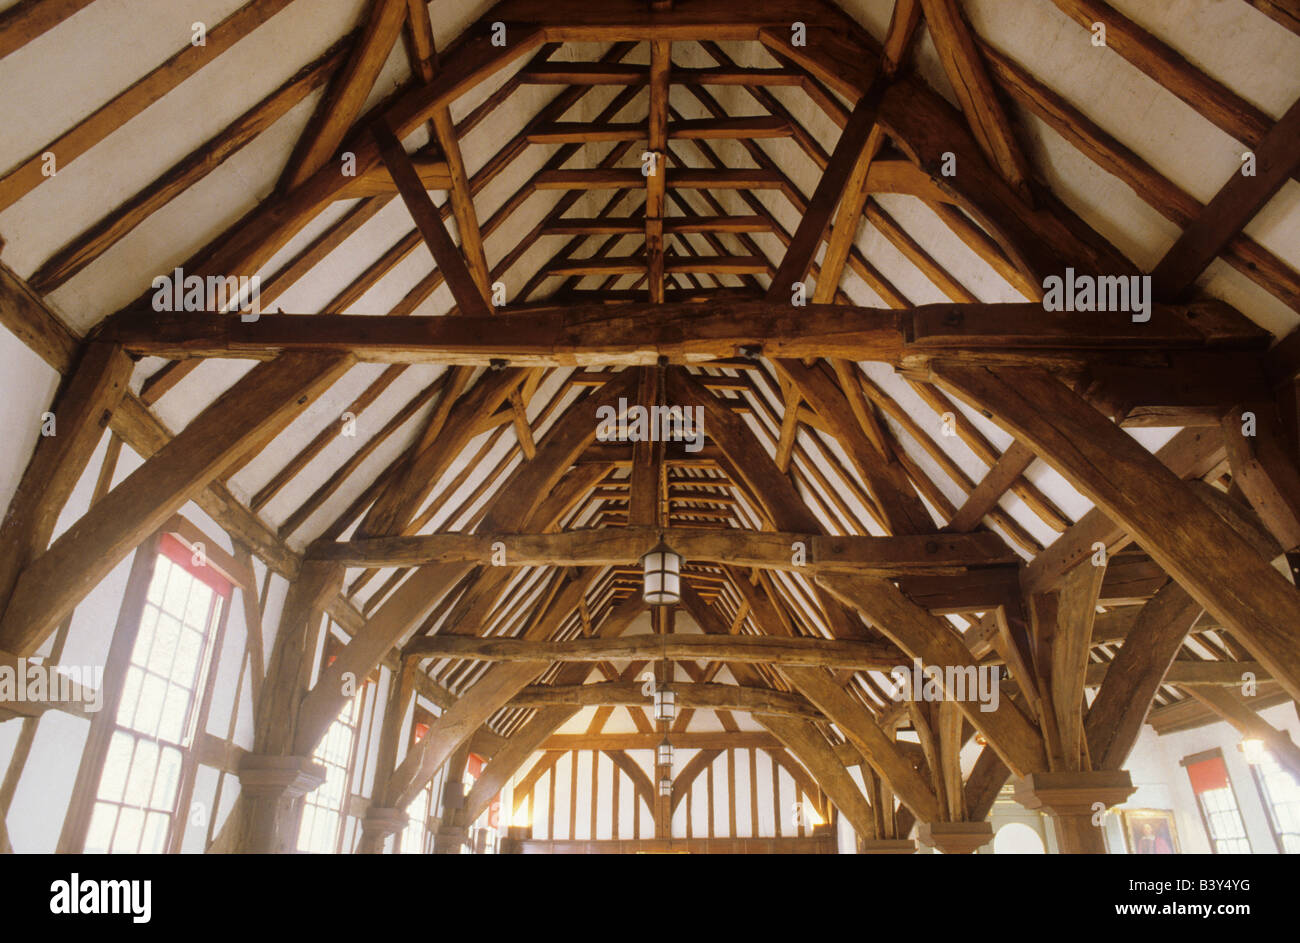 York Merchant Adventurers Hall Guildhall interior timbered roof Medieval English architecture Yorkshire England UK Stock Photo